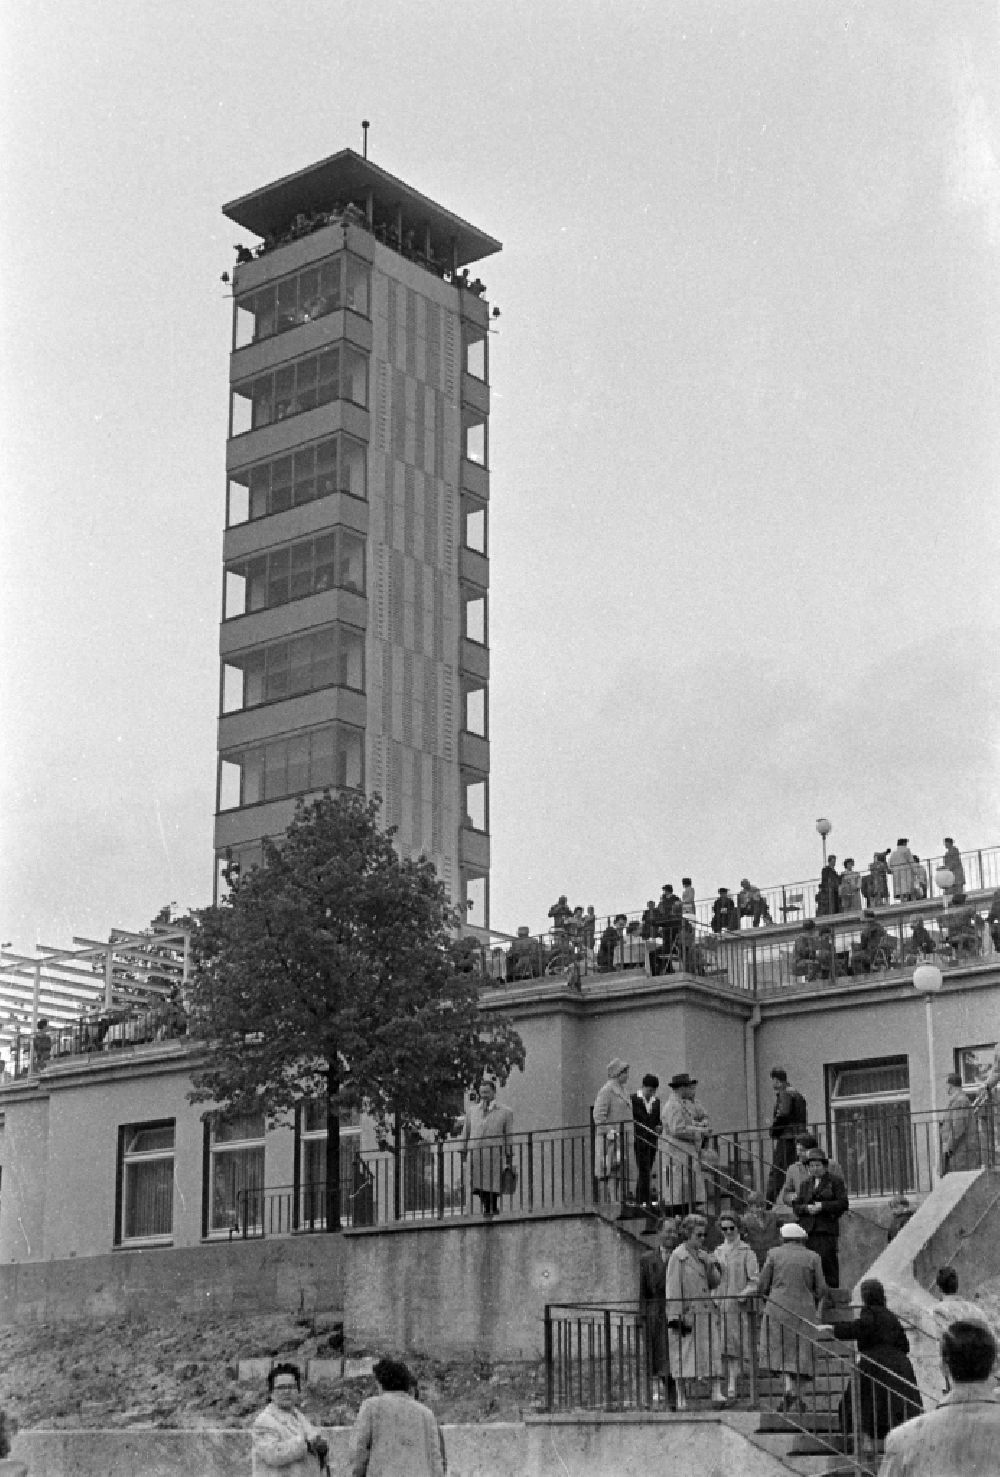 Berlin: Structure of the observation tower on street Strasse zum Mueggelturm in the district Gruenau in Berlin Eastberlin on the territory of the former GDR, German Democratic Republic